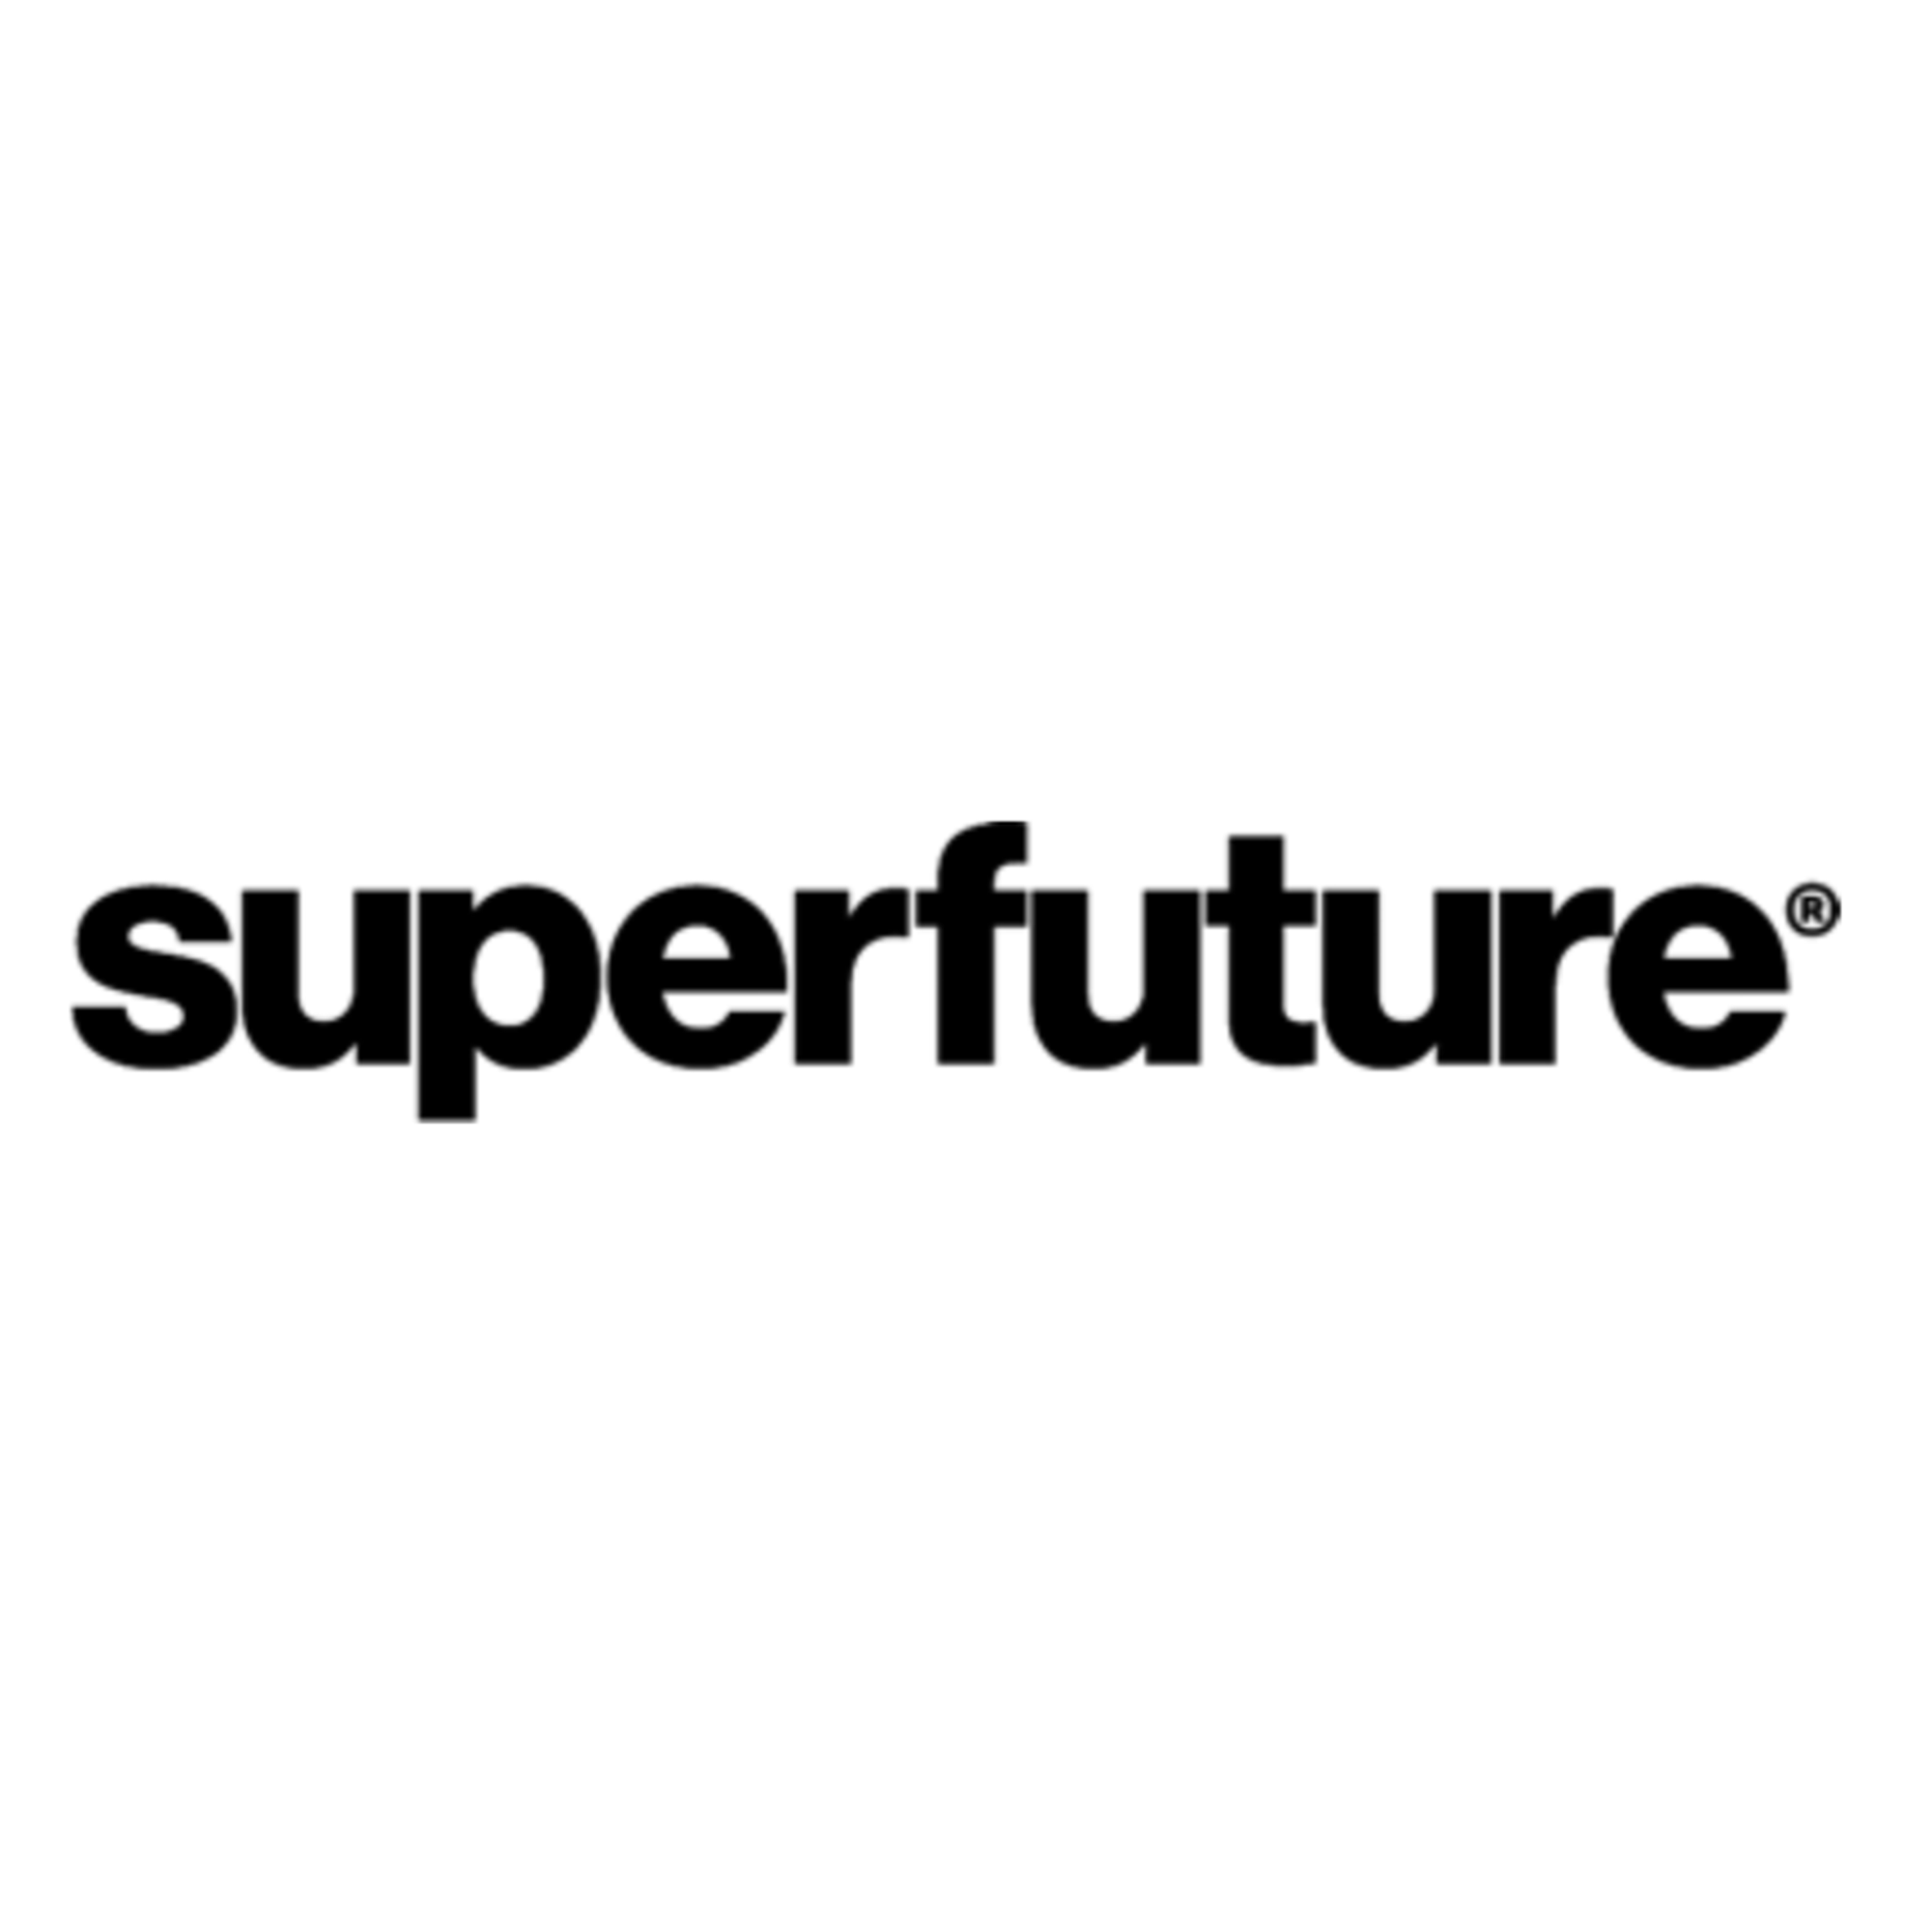 superfuture.png